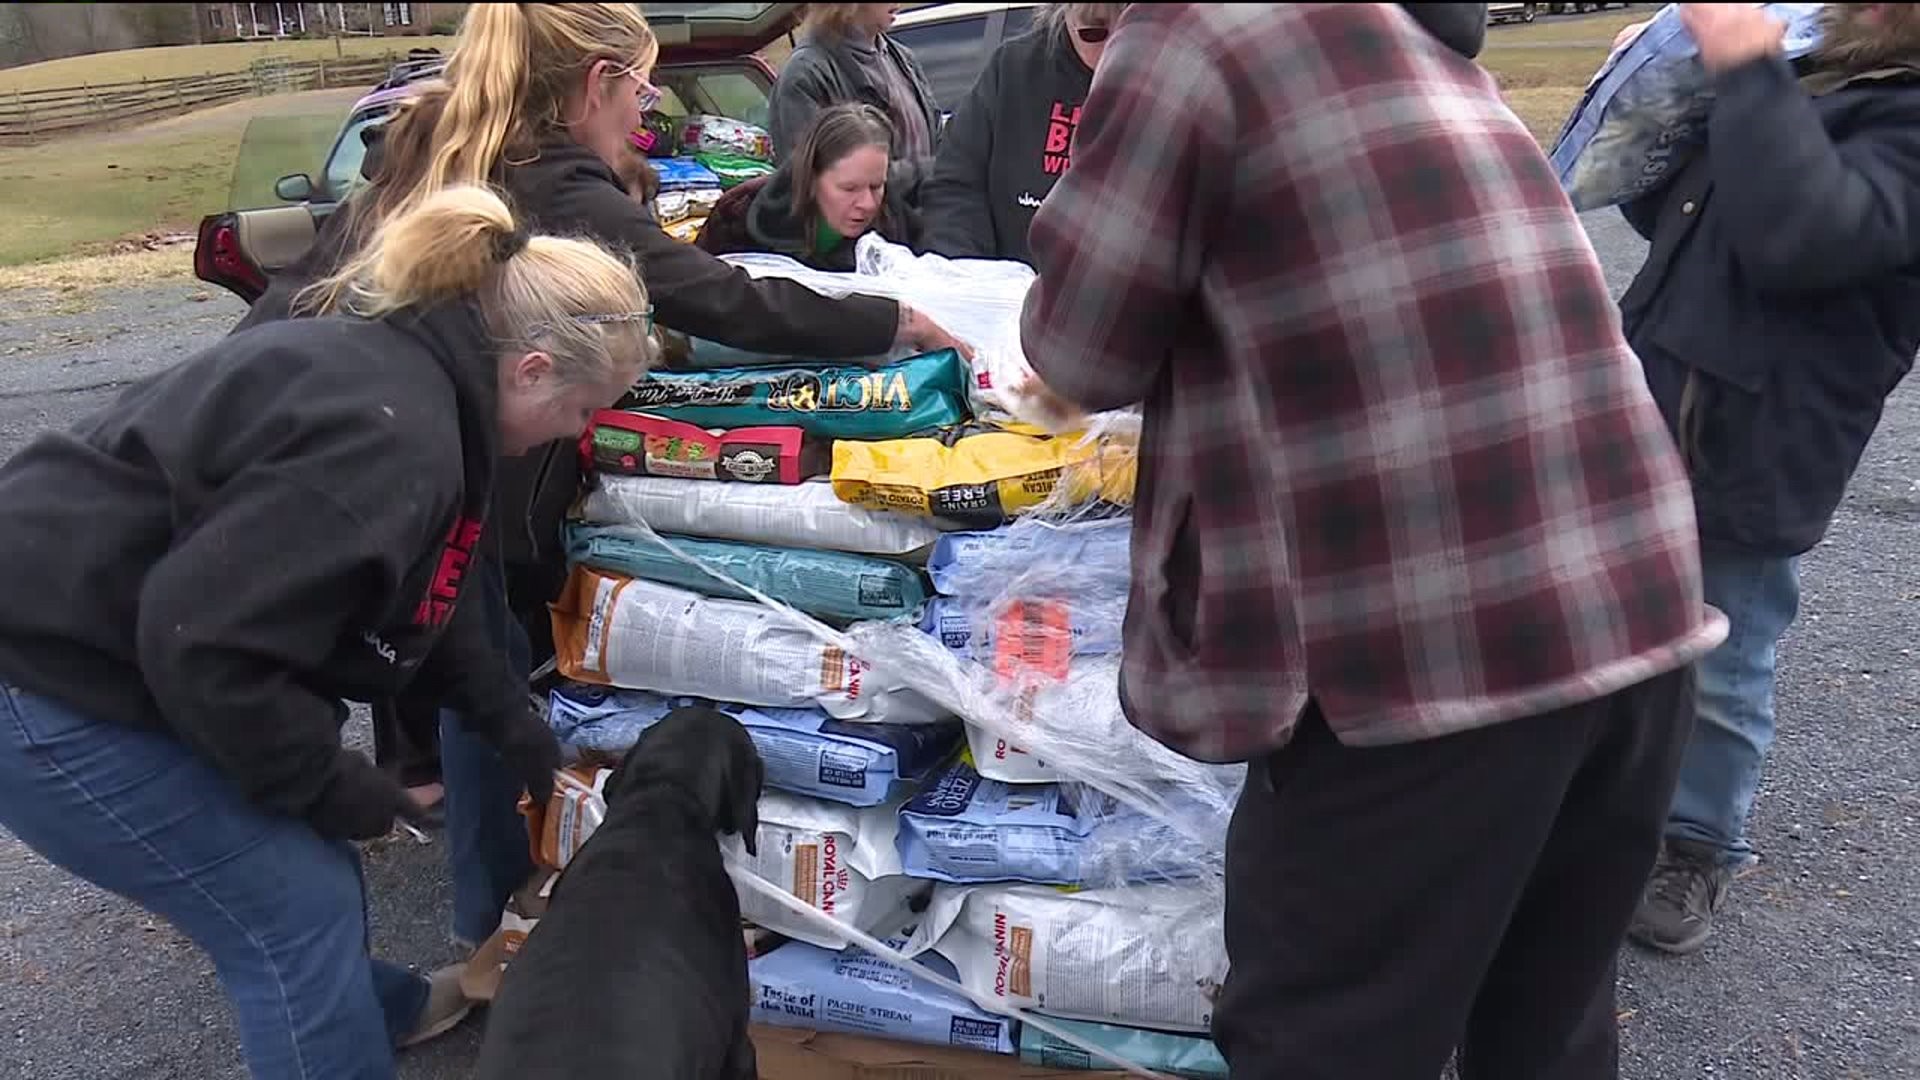 'It's Christmas!' Animal Shelters Receive Large Donation